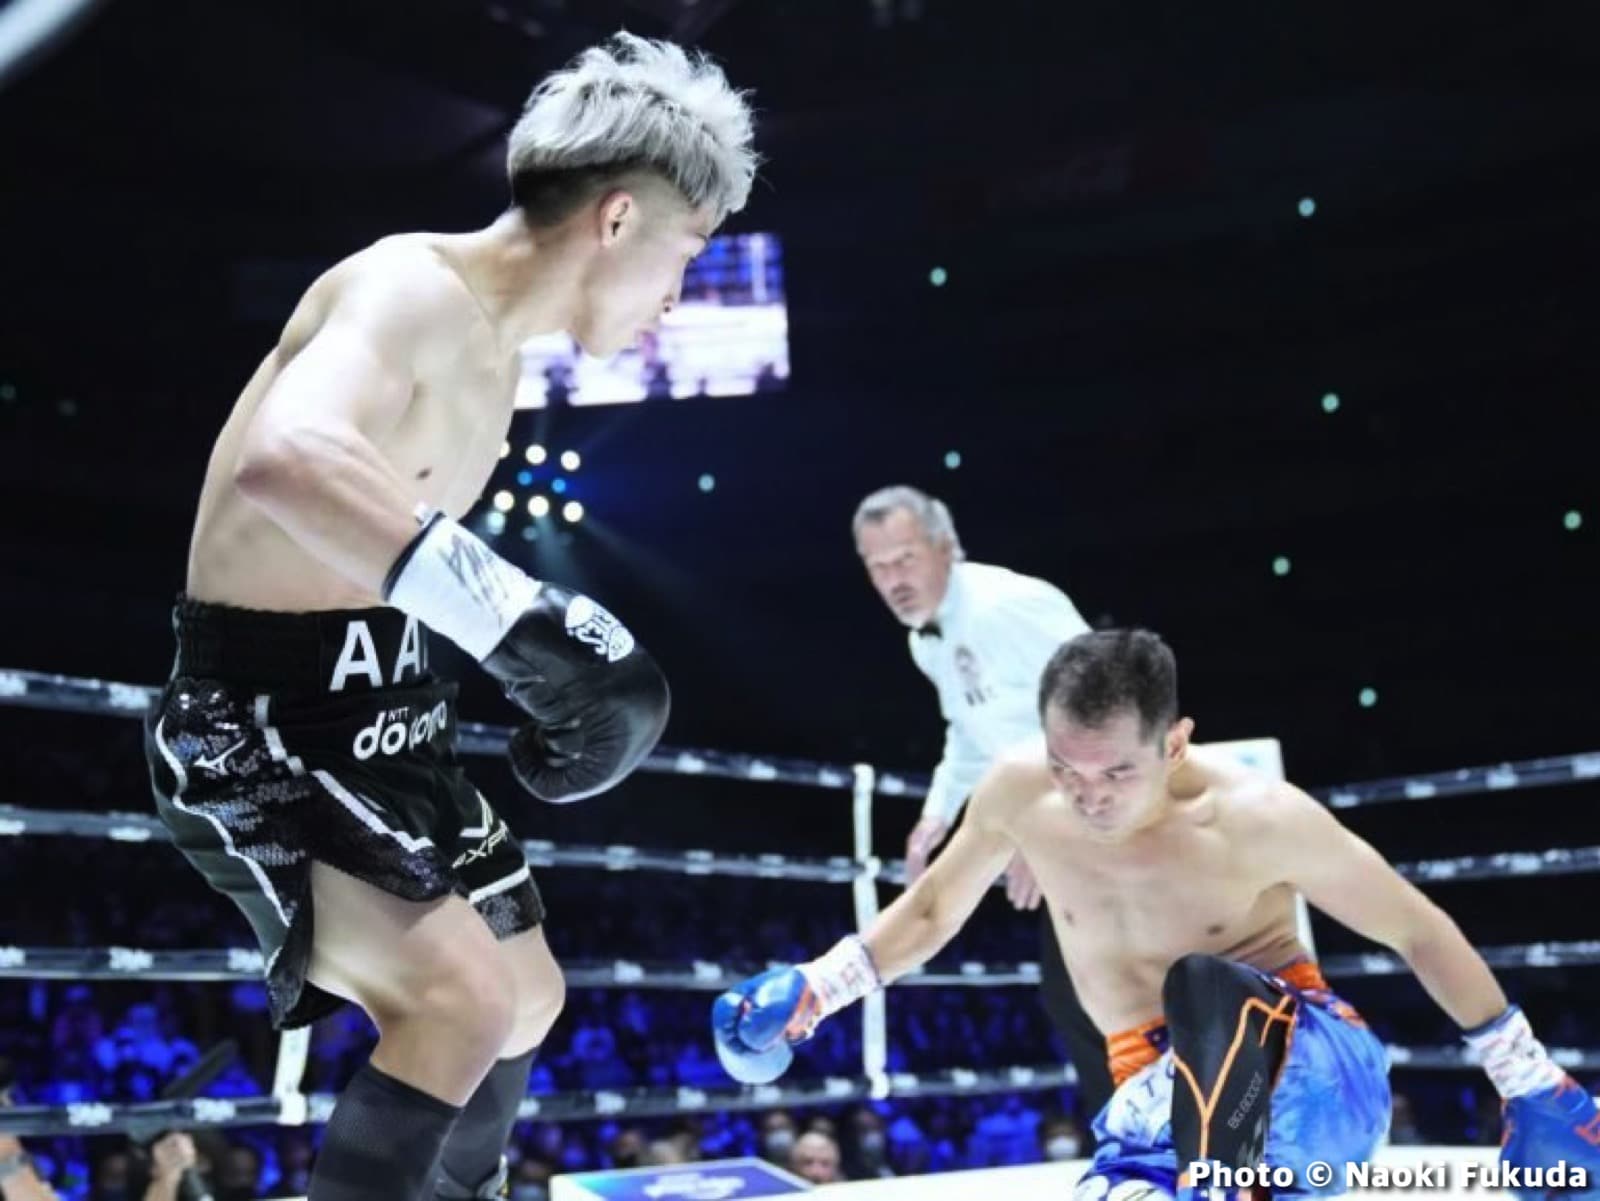 Nonito Donaire went "completely blank" after Naoya Inoue hit him in 1st round